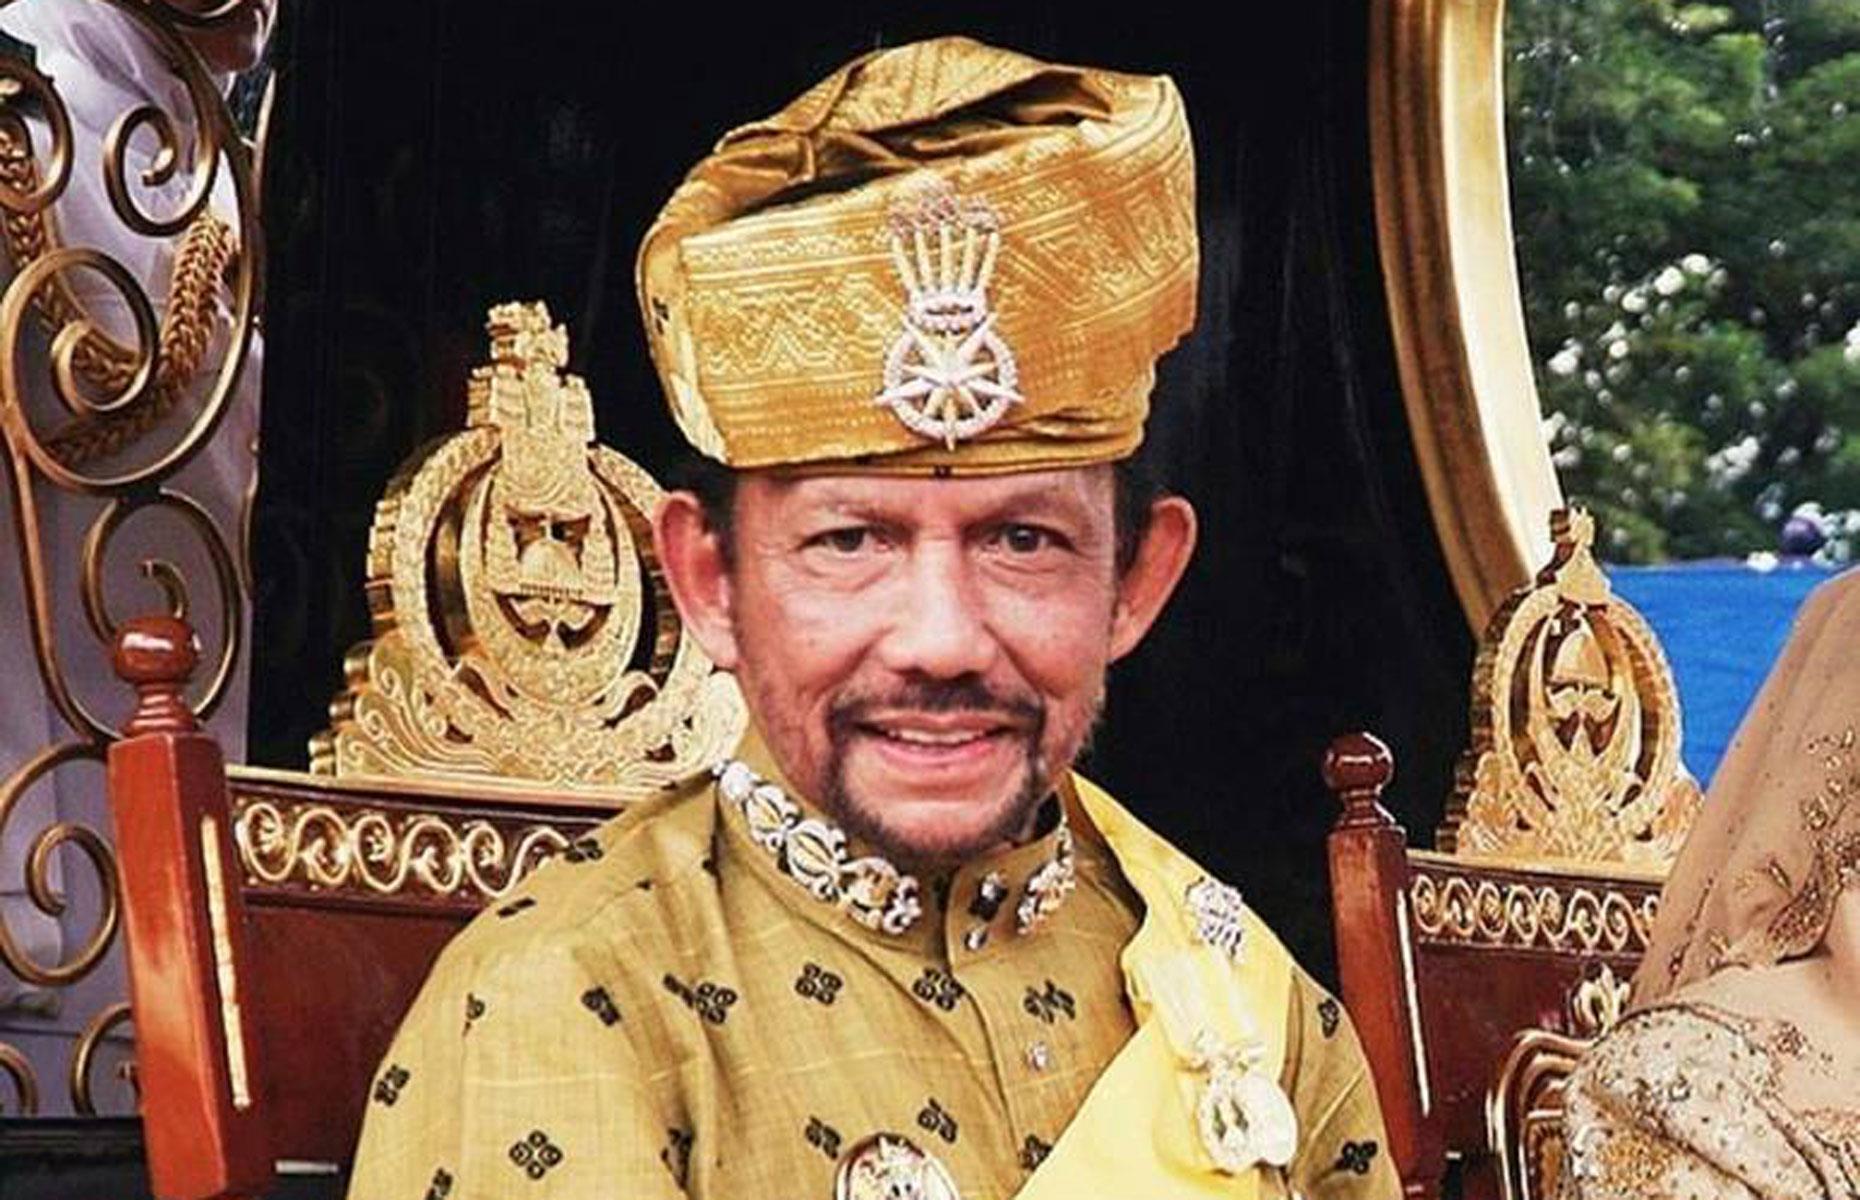 <p>Brunei's royal dynasty, the House of Bolkiah, was formed in 1363 and has ruled the southeast Asian country on and off ever since.</p>  <p>Headed by Sultan Hassanal Bolkiah (pictured), the family has become rich thanks to Brunei's vast reserves of oil.</p>  <p>The Sultan, who owns 500 Rolls Royce cars, 300 Ferraris, and a fleet of private jets, is estimated to be worth around $30 billion.</p>